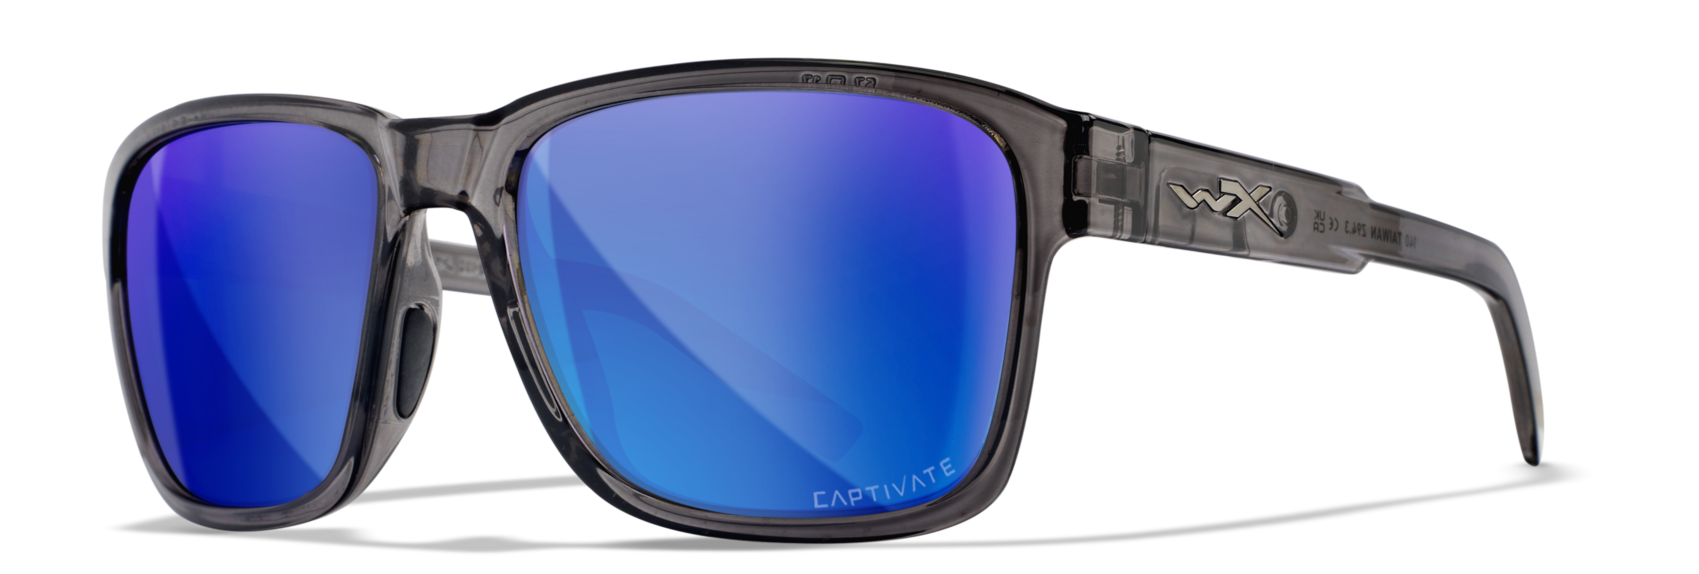 Wiley X Airrage Captivate Polarized Sunglasses, Safety Glasses for